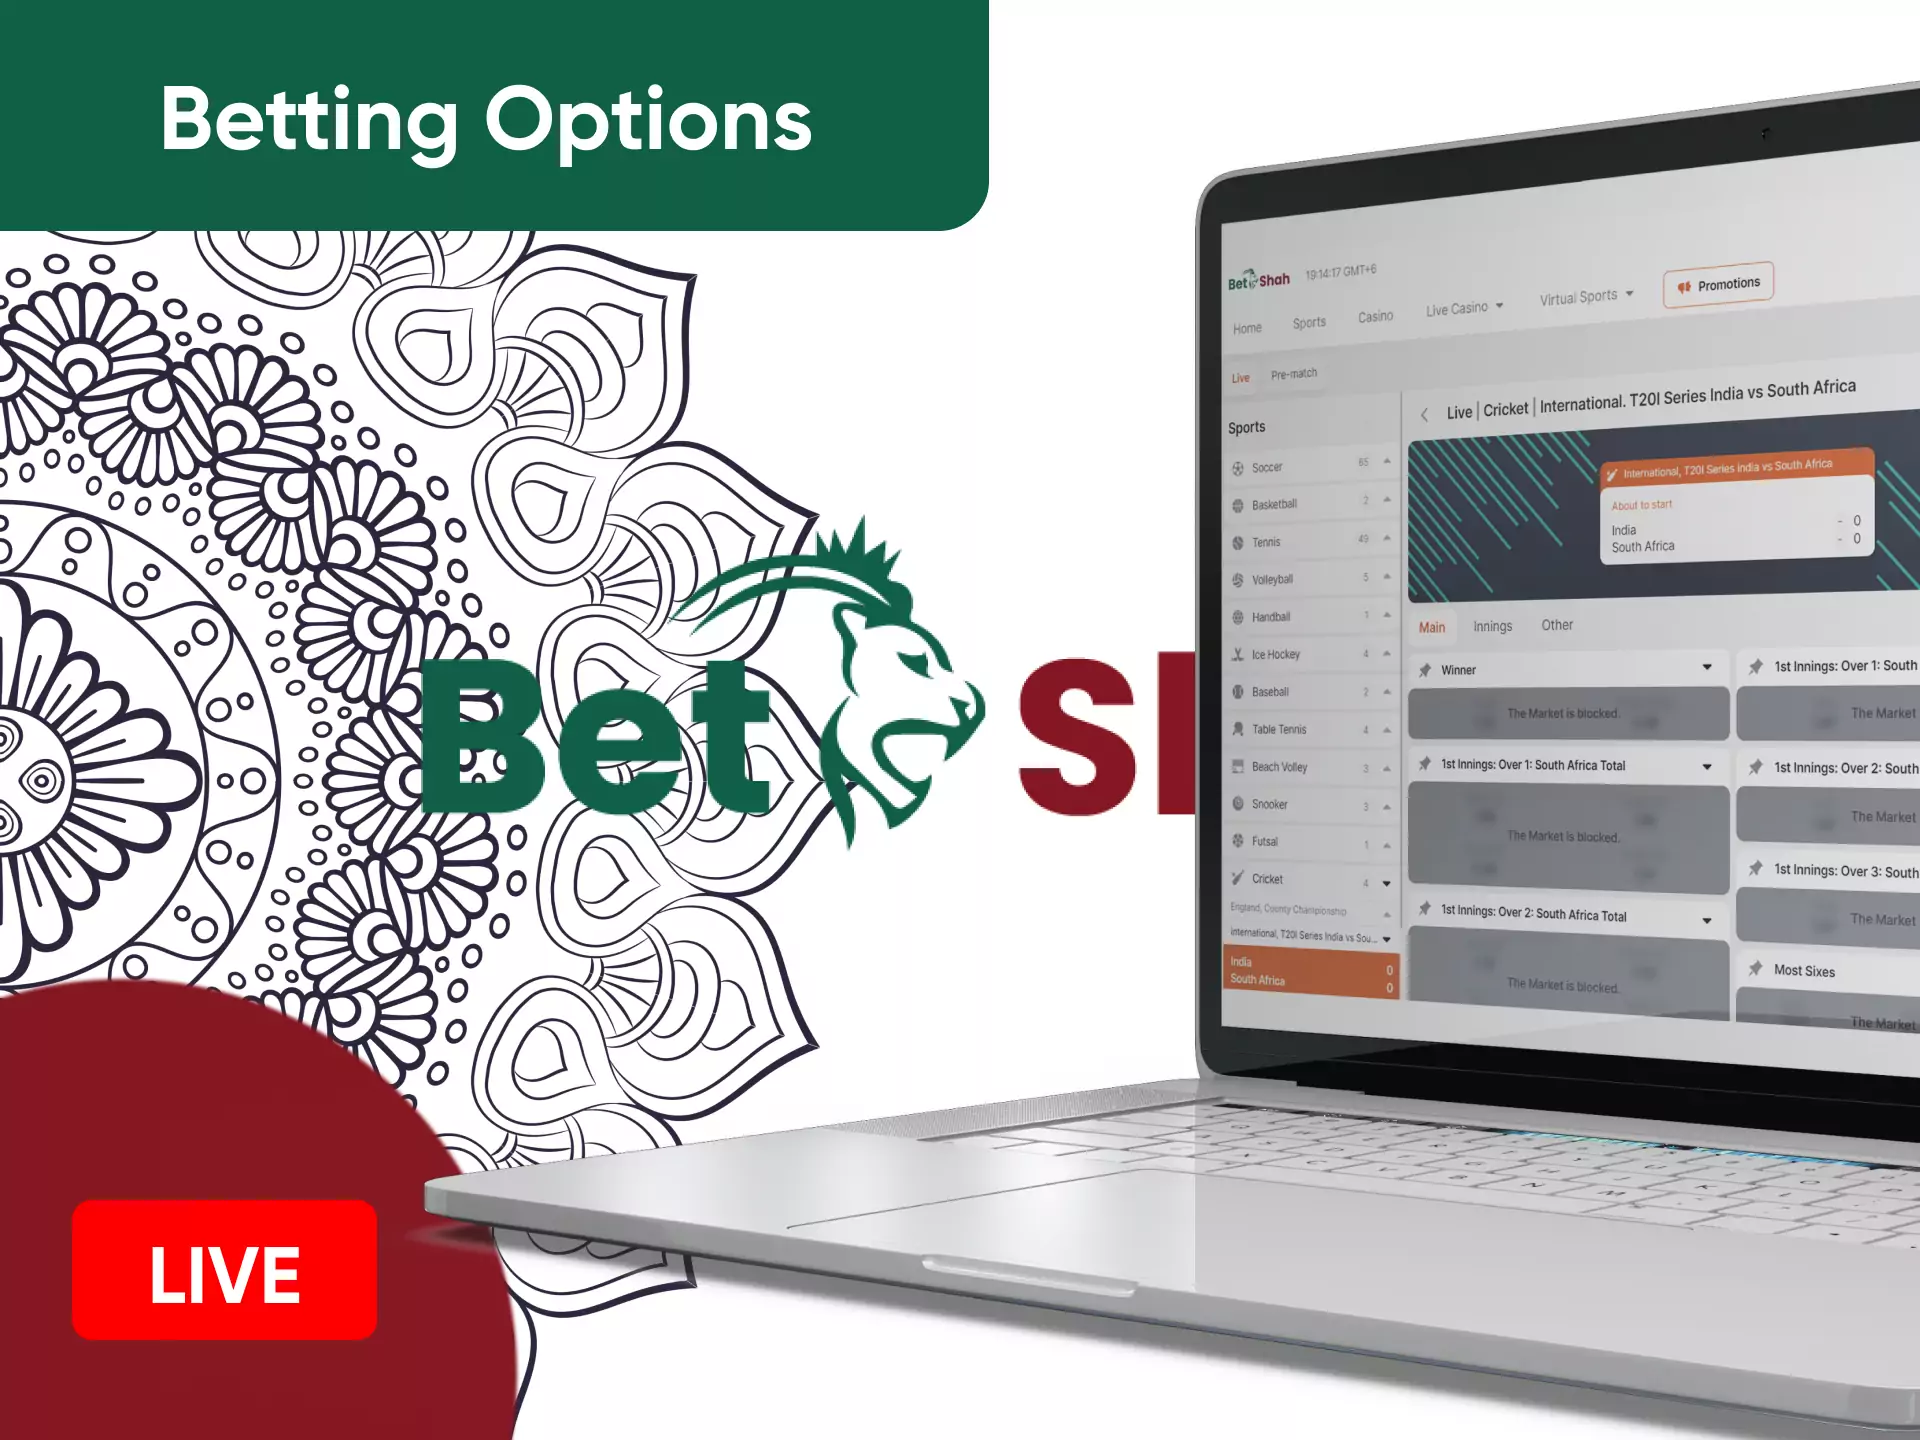 On Betshah, you can place bets beforehand as well as during live matches.